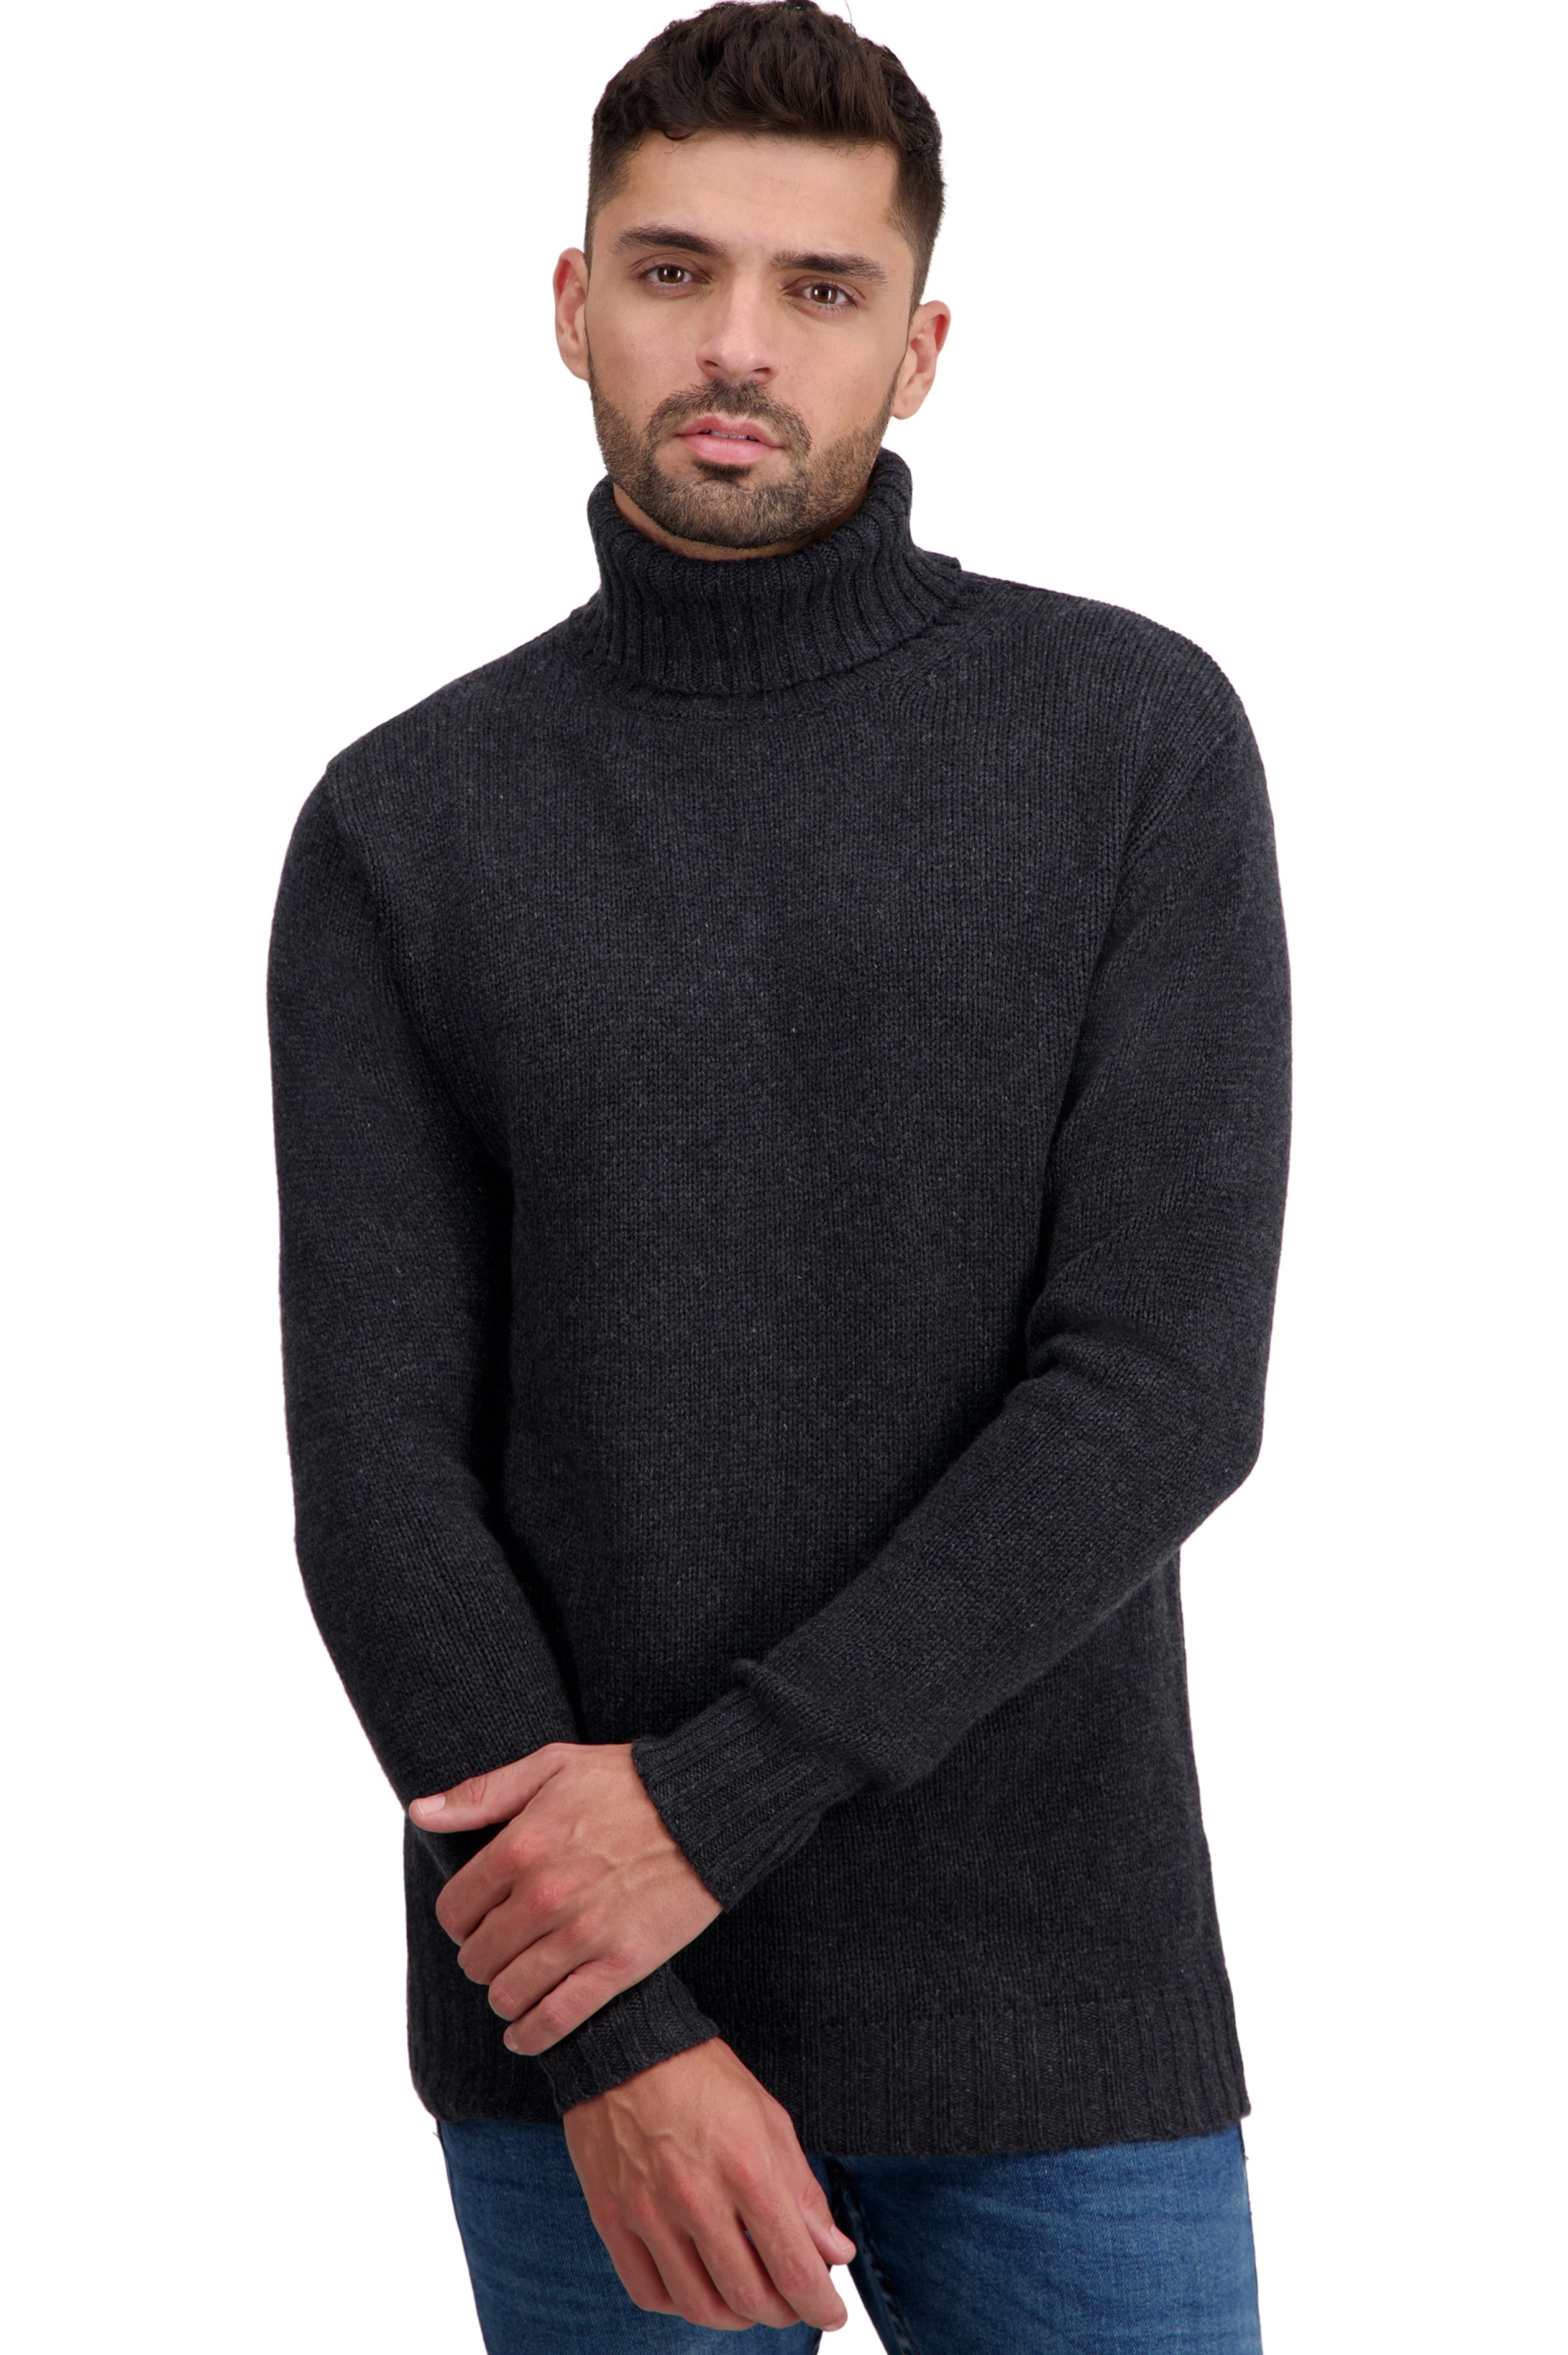 Cashmere men basic sweaters at low prices tobago first matt charcoal m